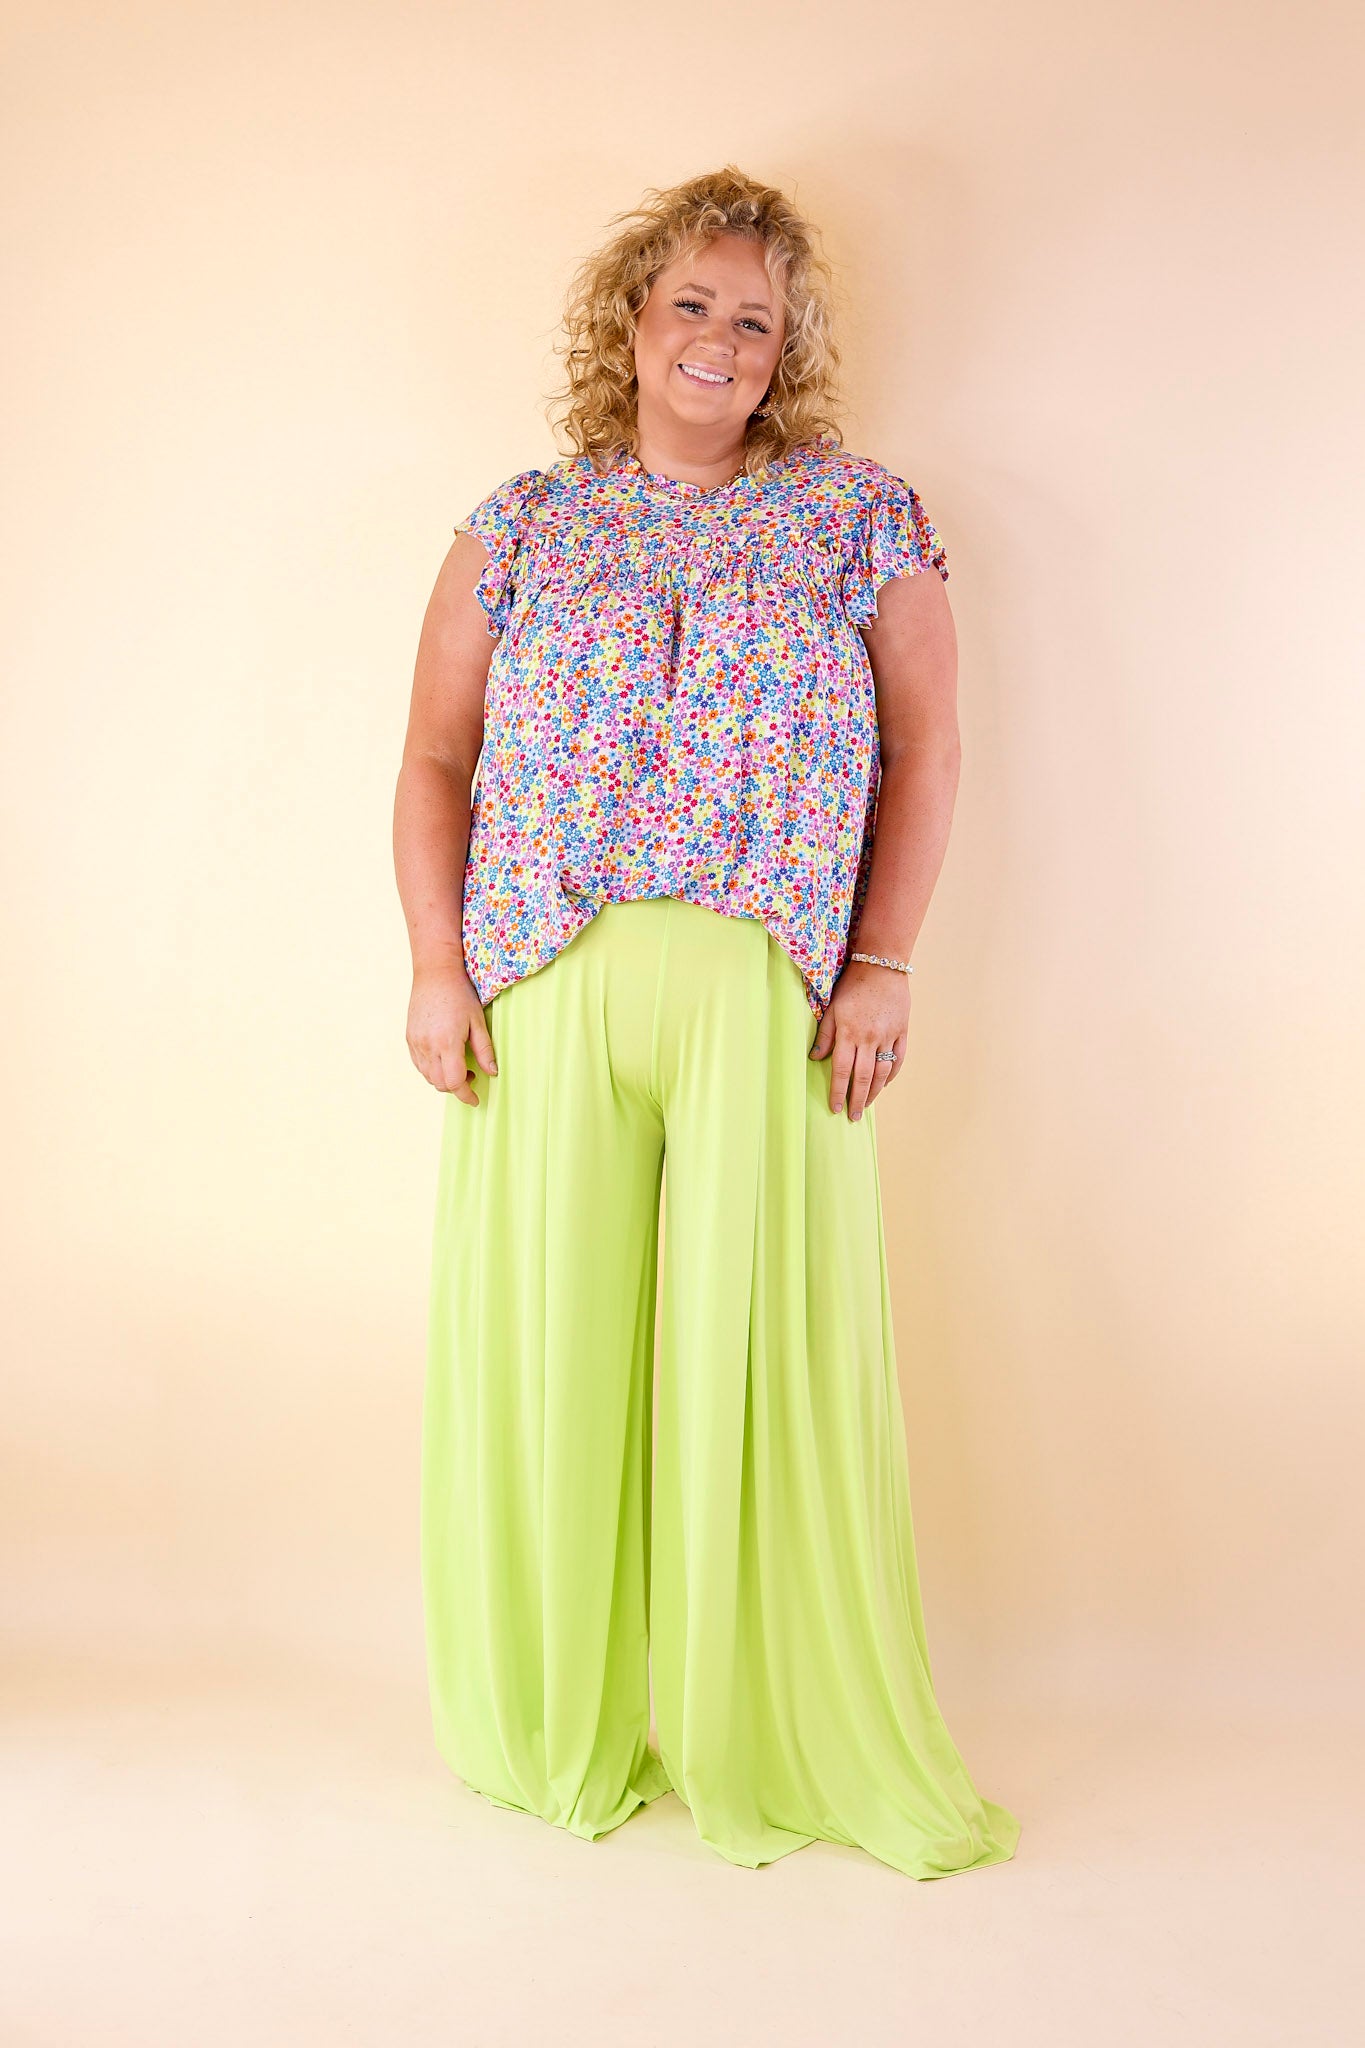 Plus Size | Urban Wonders Wide Leg Pants in Neon Lime - Giddy Up Glamour Boutique